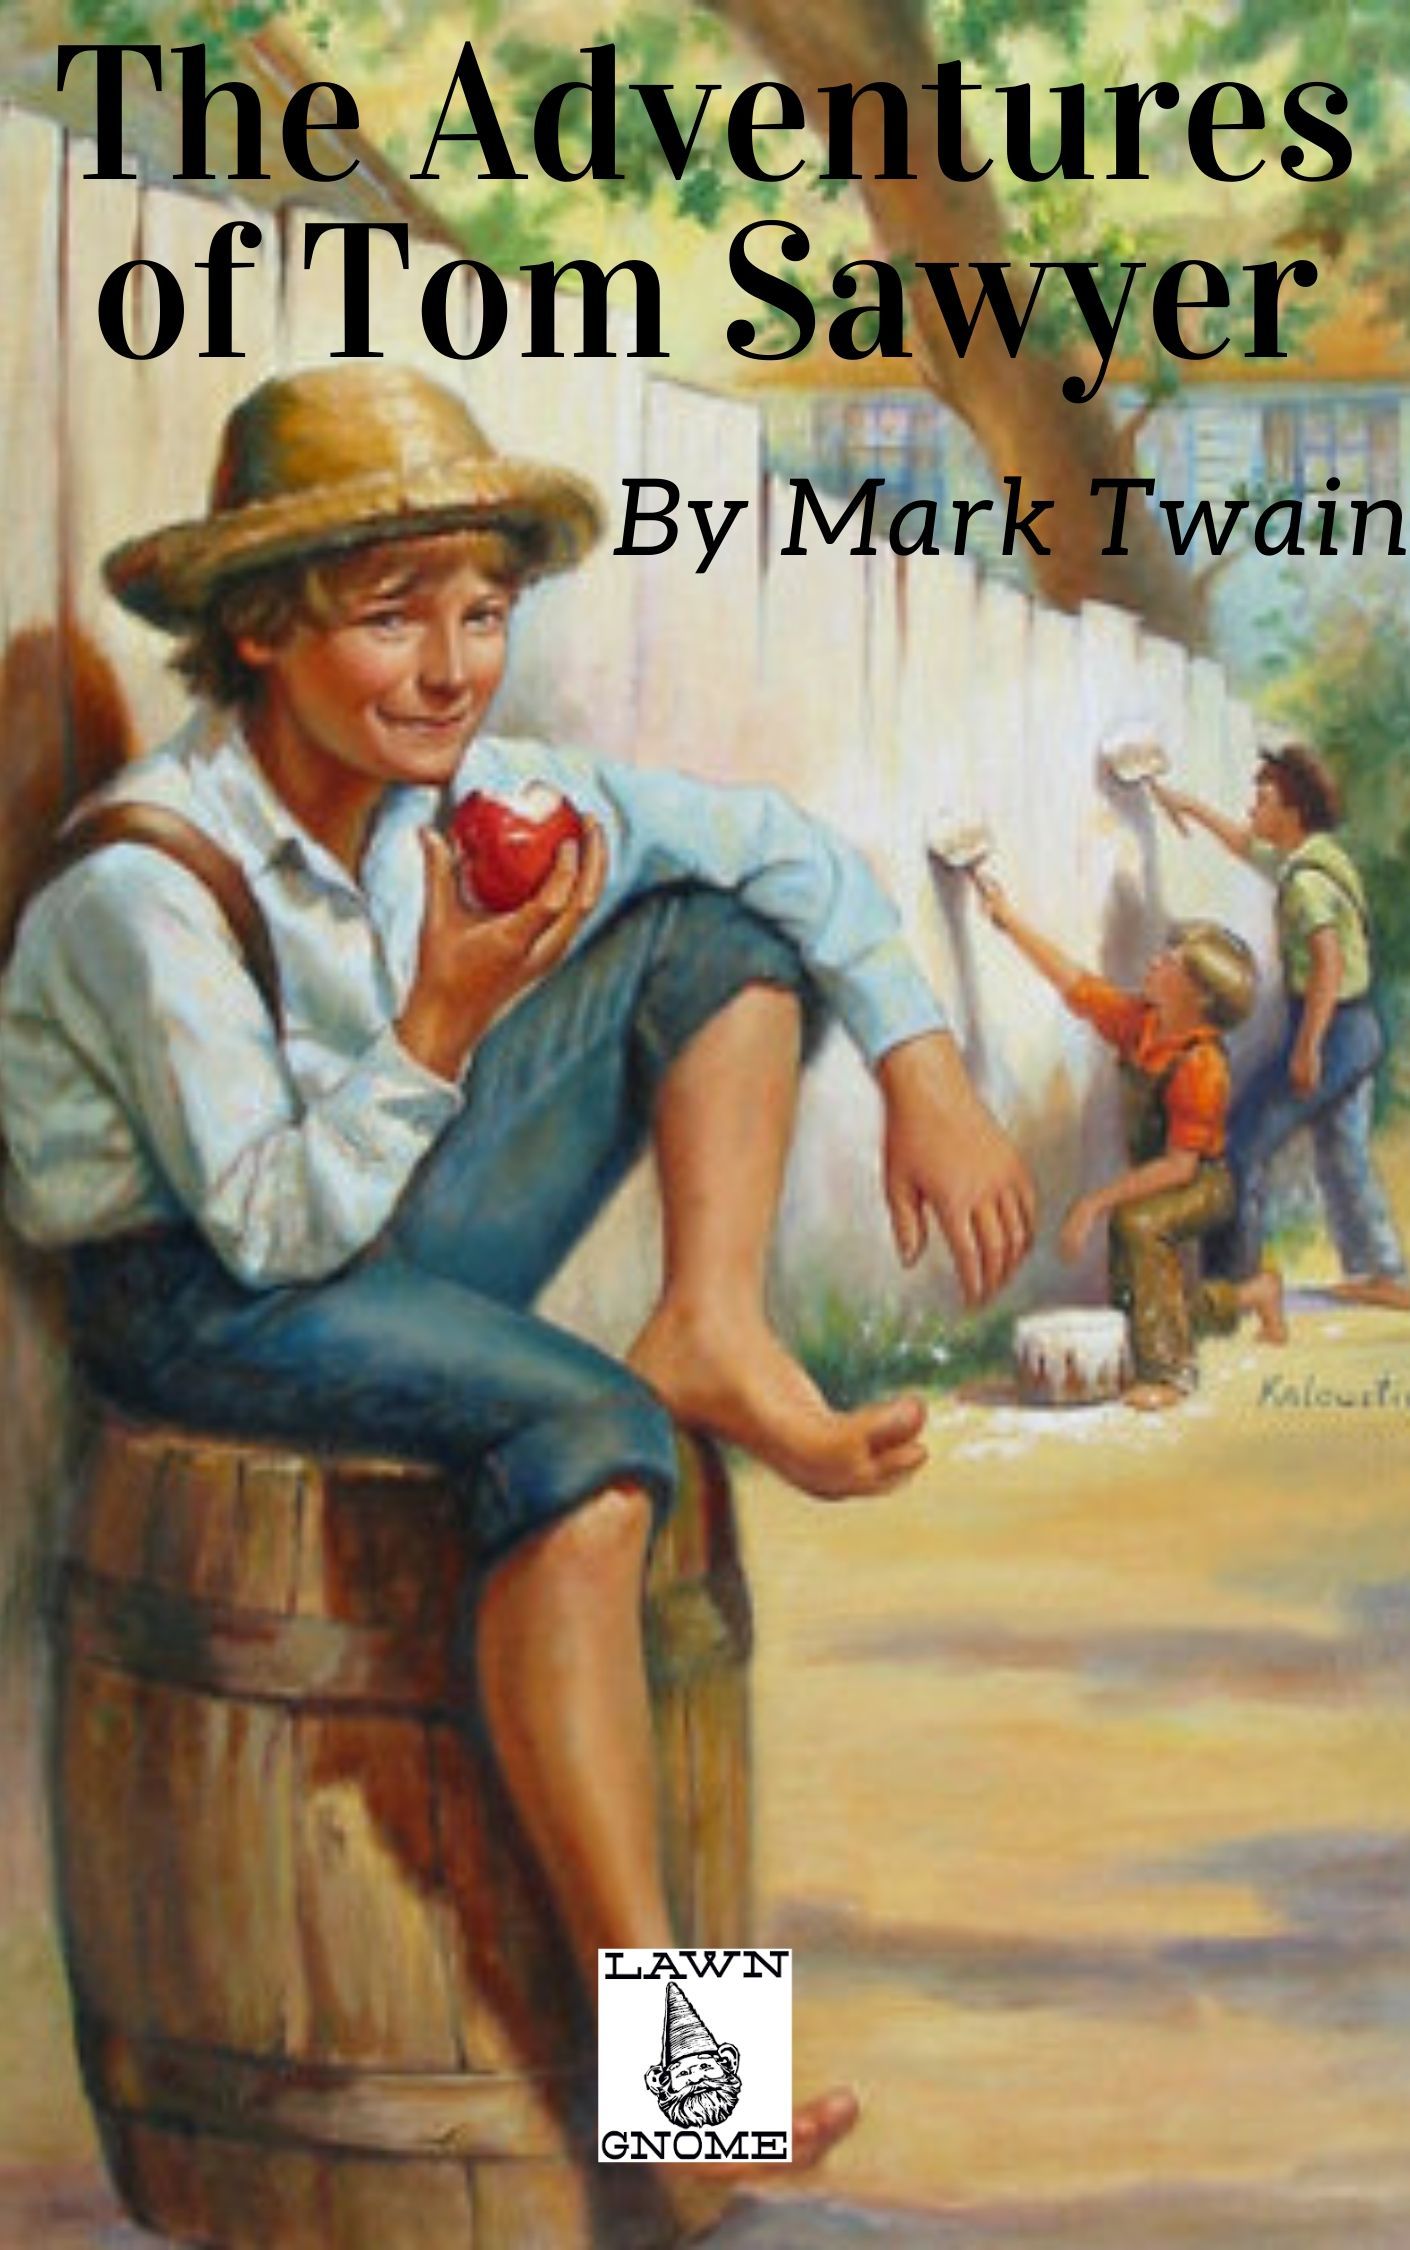 The Adventures of Tom Sawyer by Mark Twain (ebook). Lawn Gnome Publishing